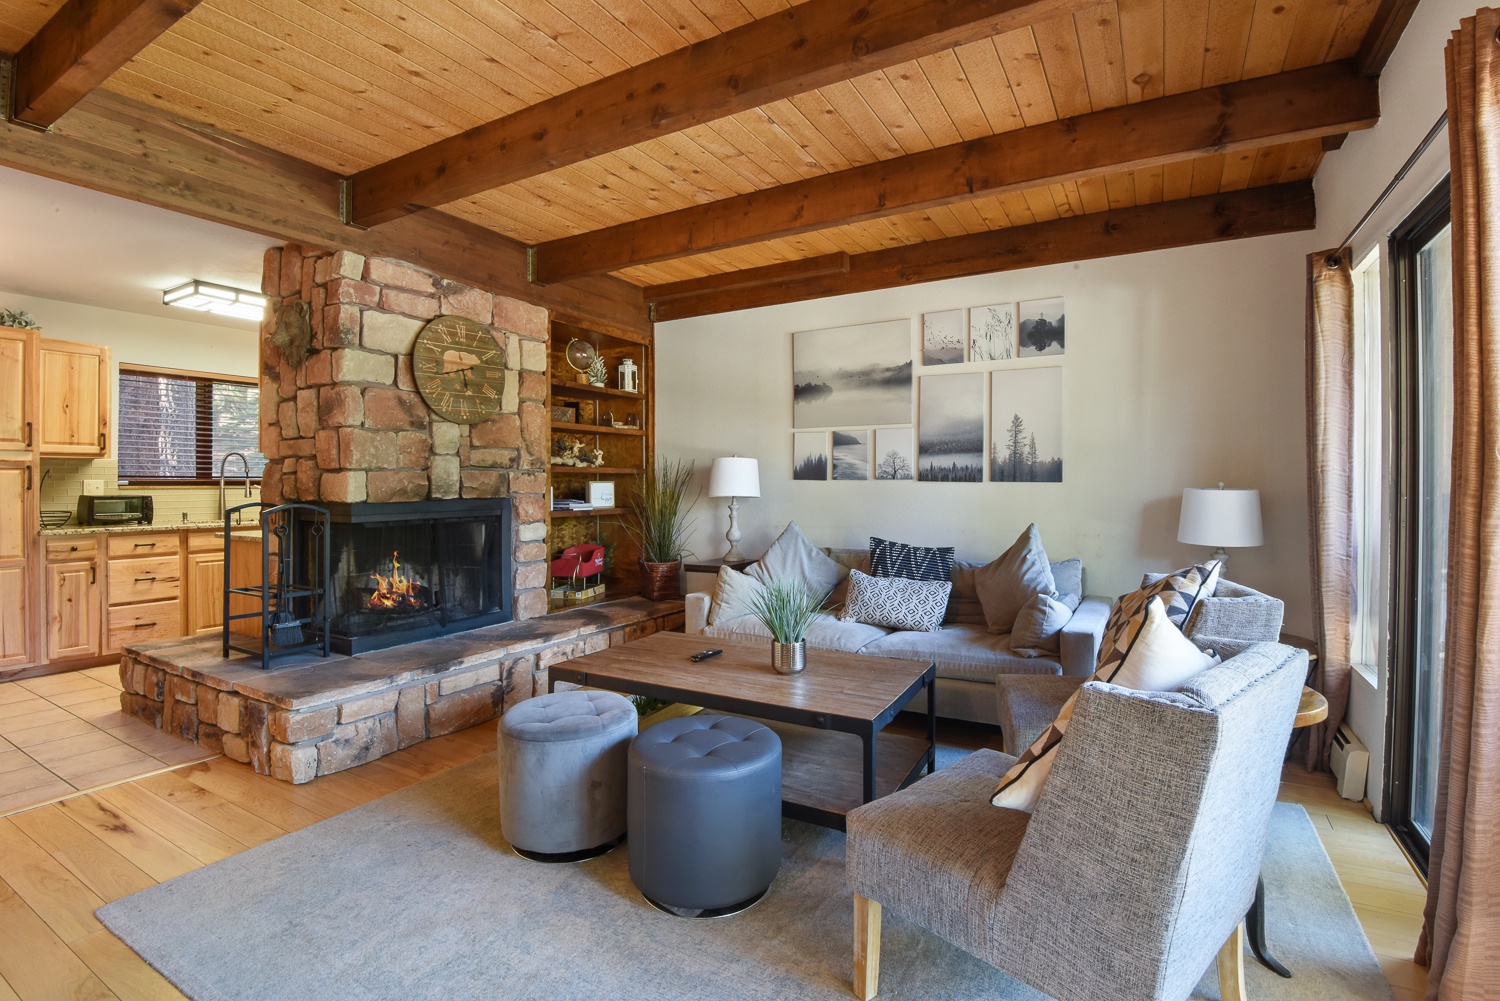 Unit #2: Elegant, rustic finishes compliment the comfy furnishings in the living room